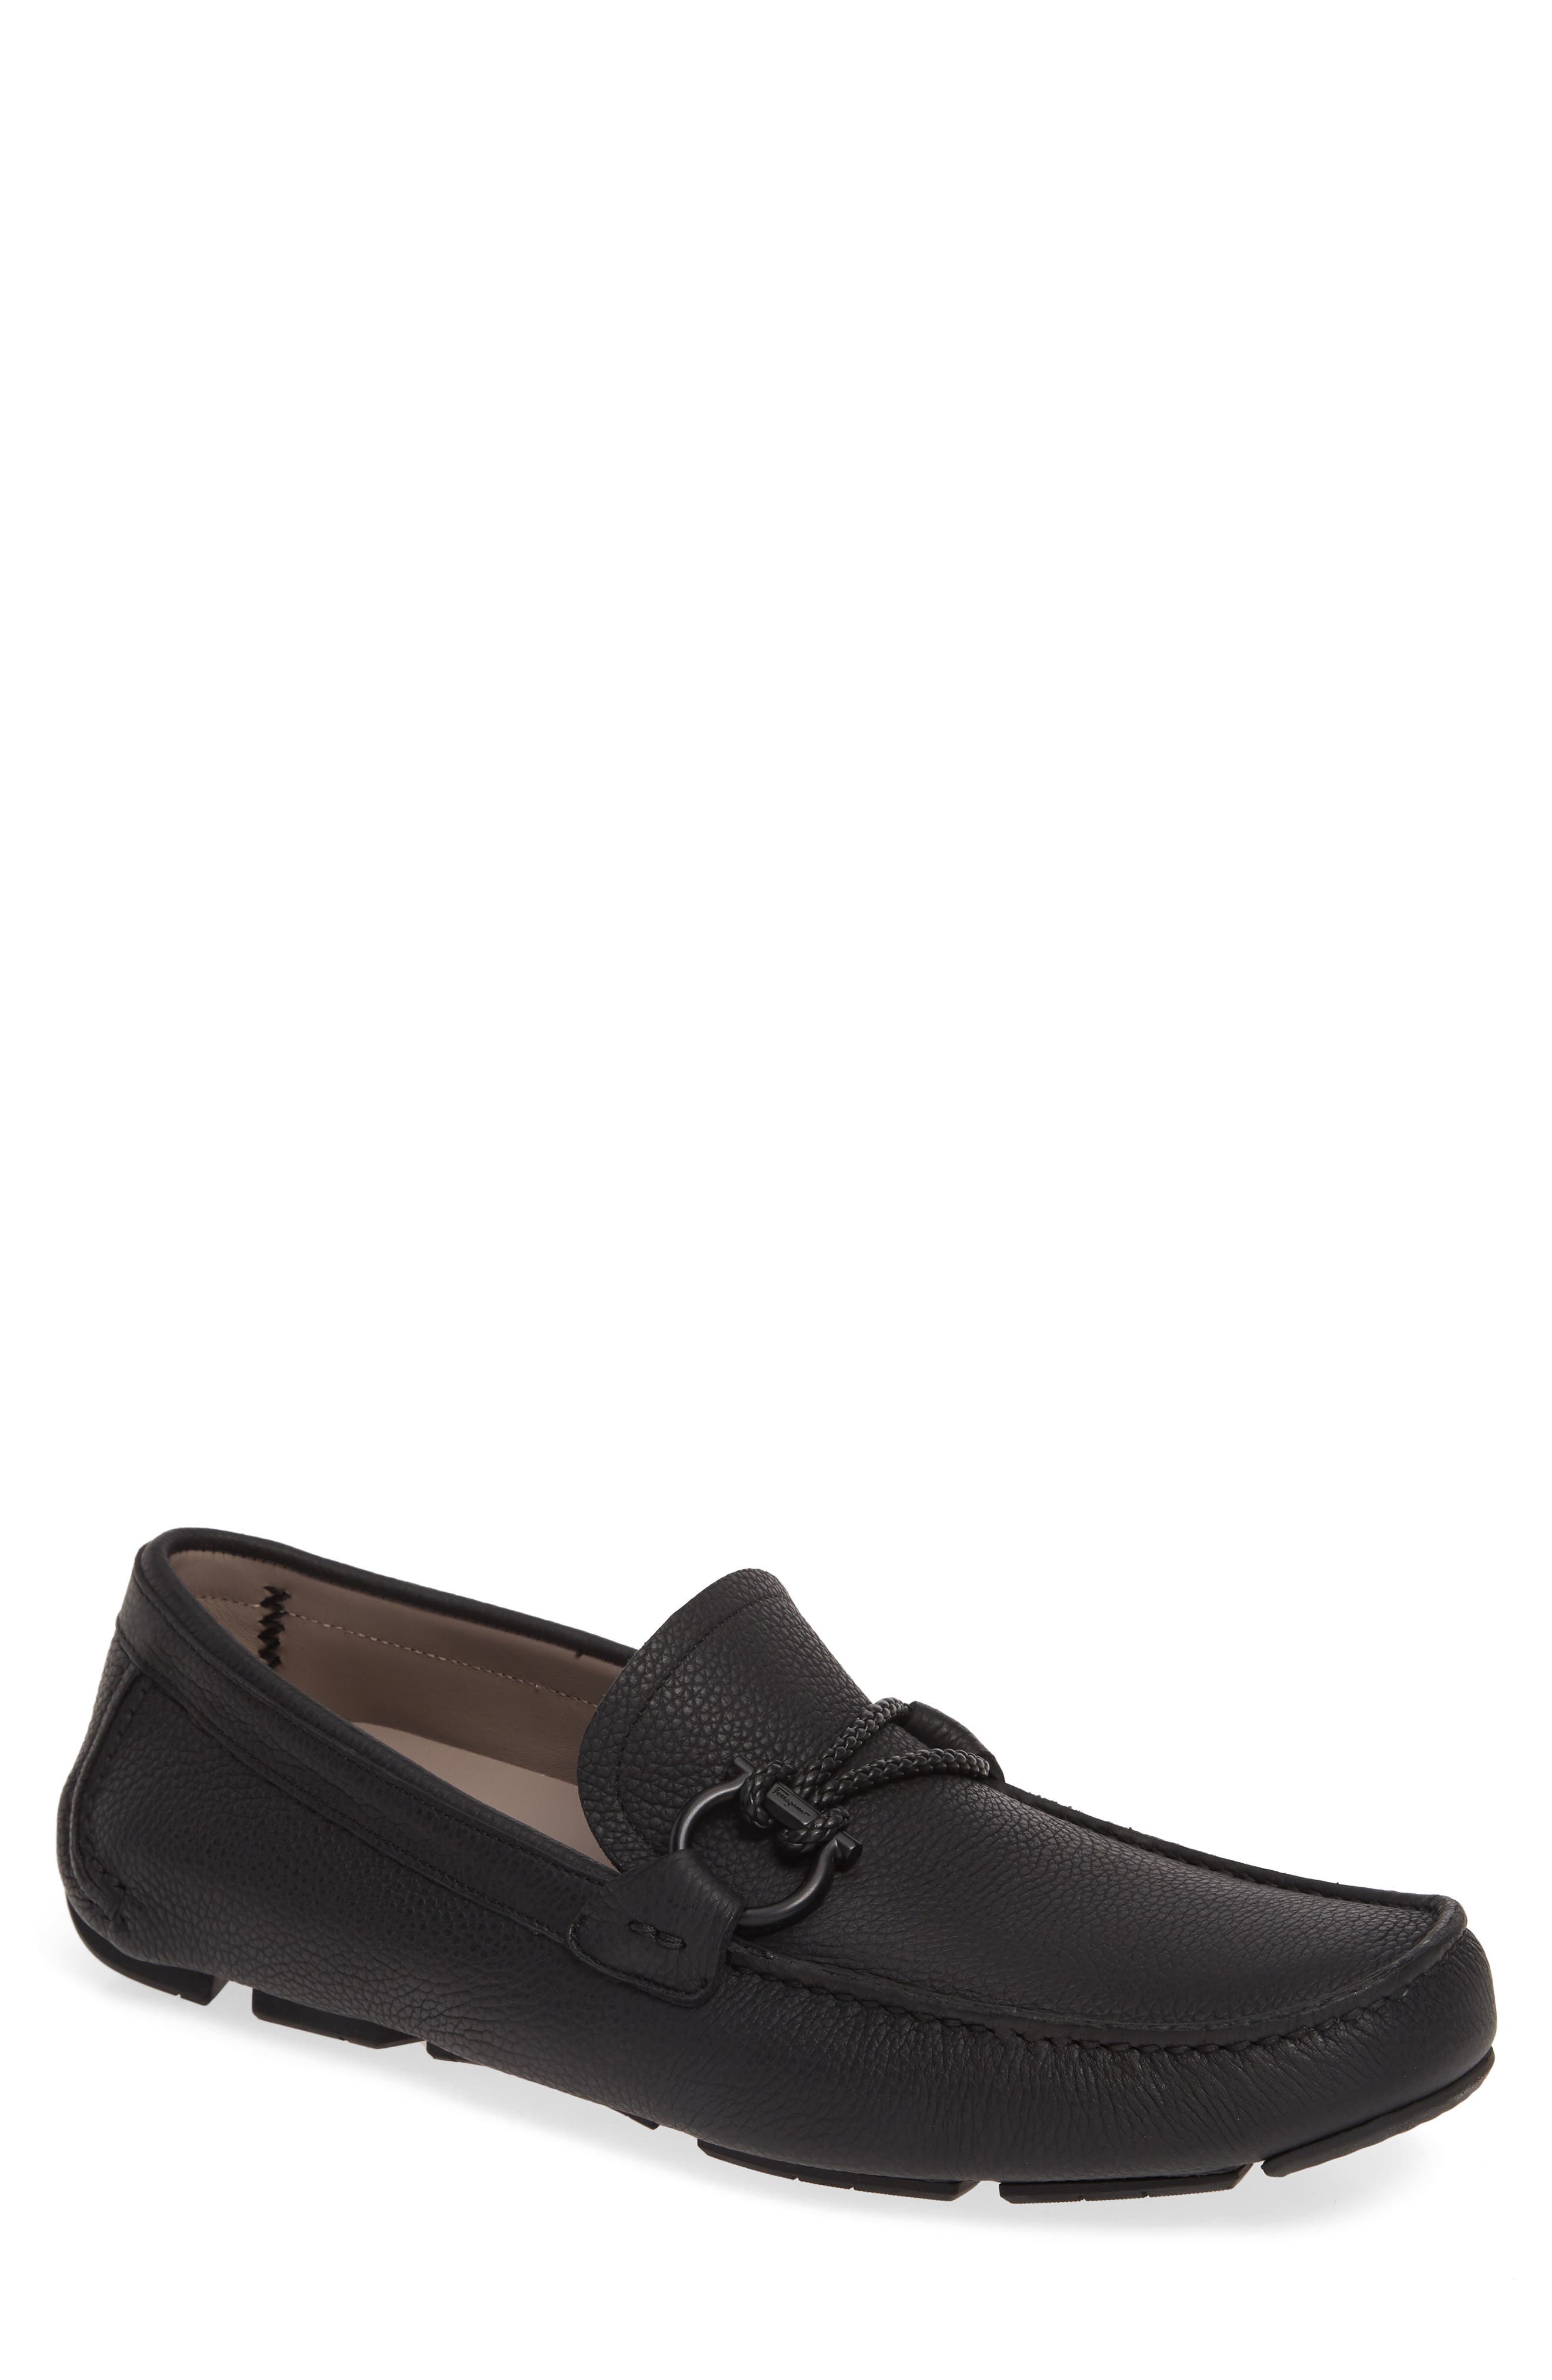 Black Ferragamo Leather Driver Loafers in Nero||Nero for Men Mens Shoes Slip-on shoes Loafers 